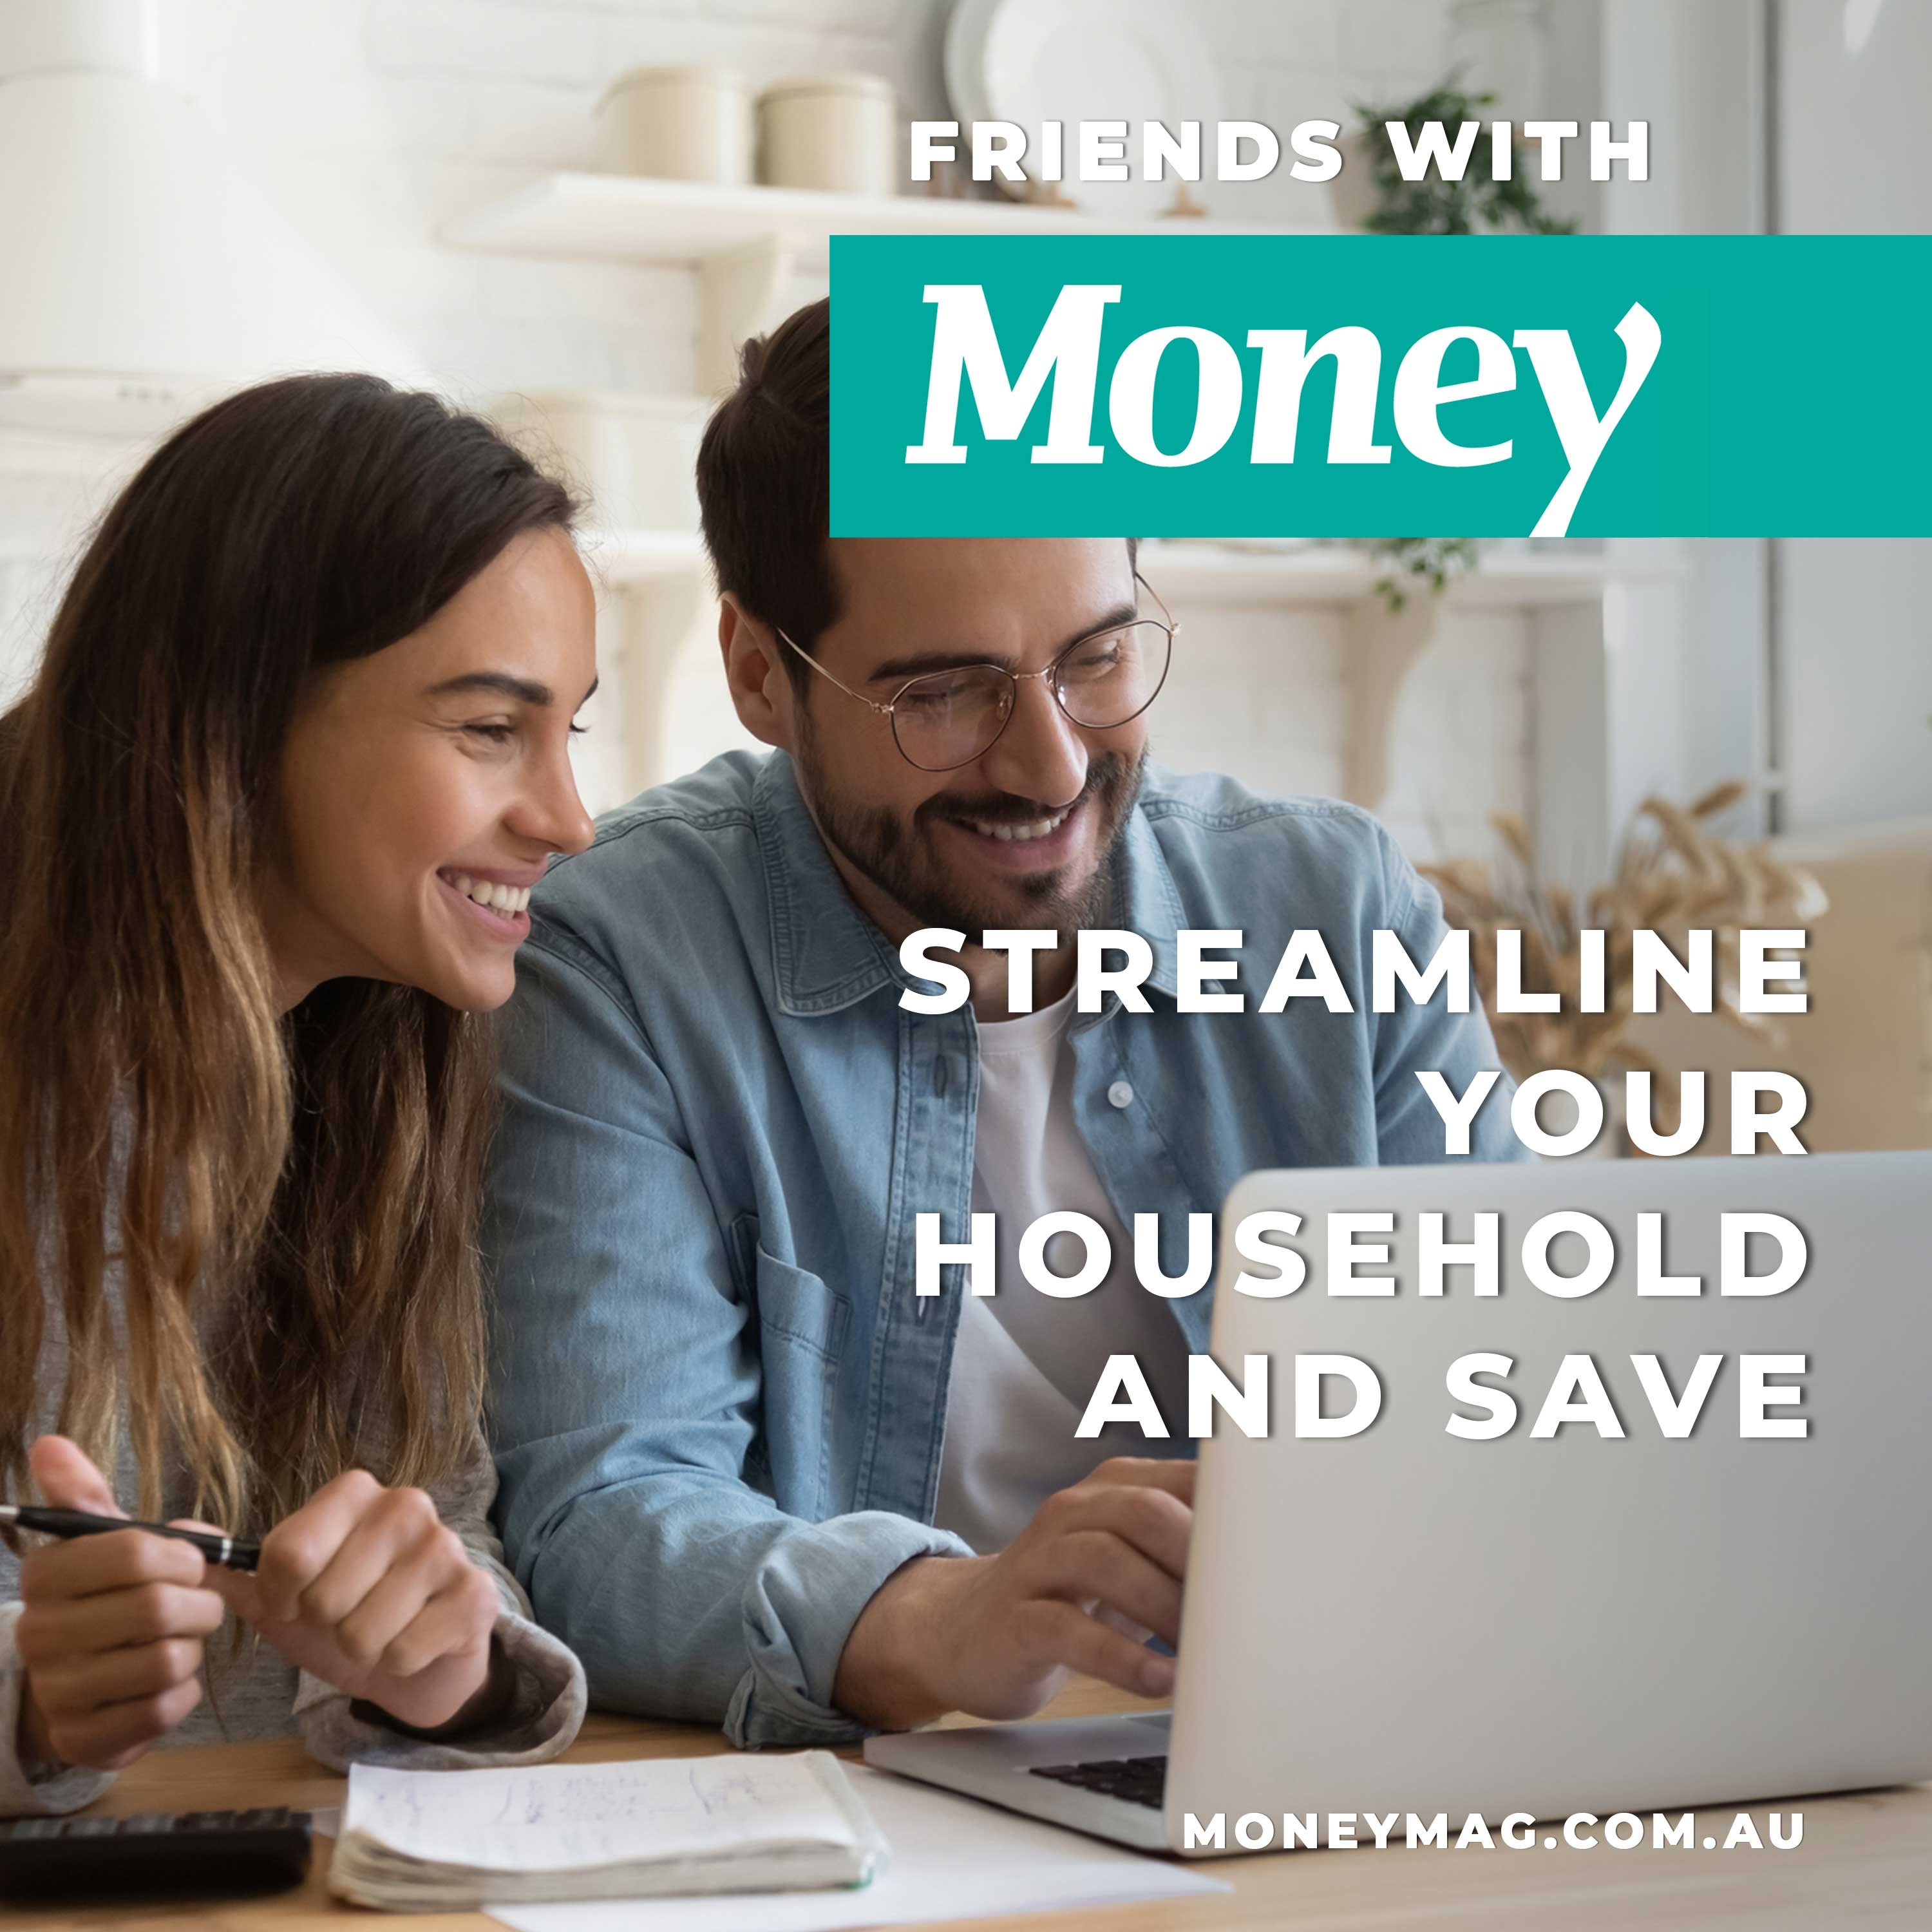 Streamline your household and save!